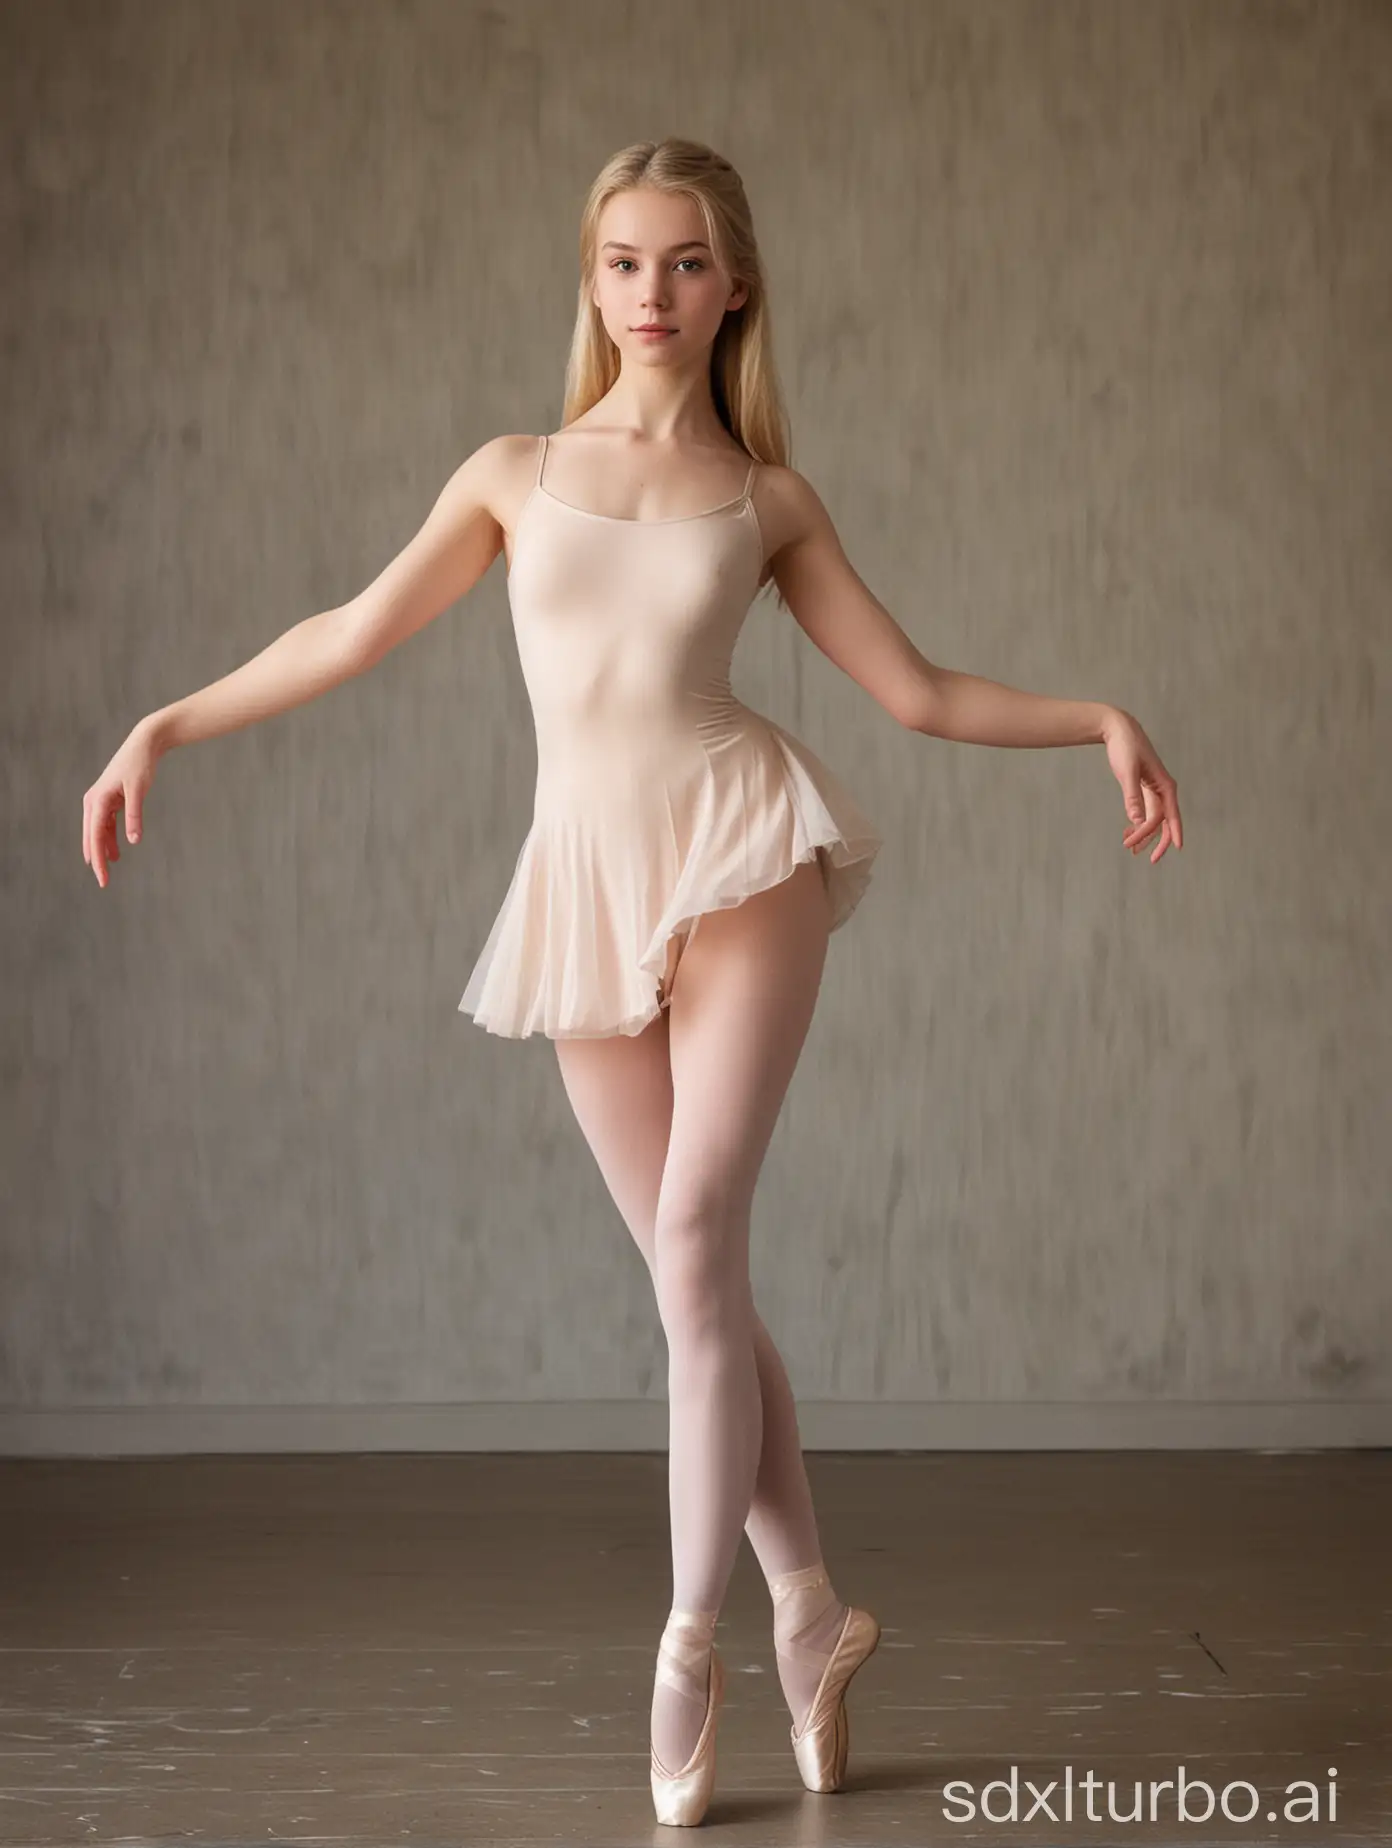 18 year old naked blonde slender beauty with medium length hair as classical ballet dancer